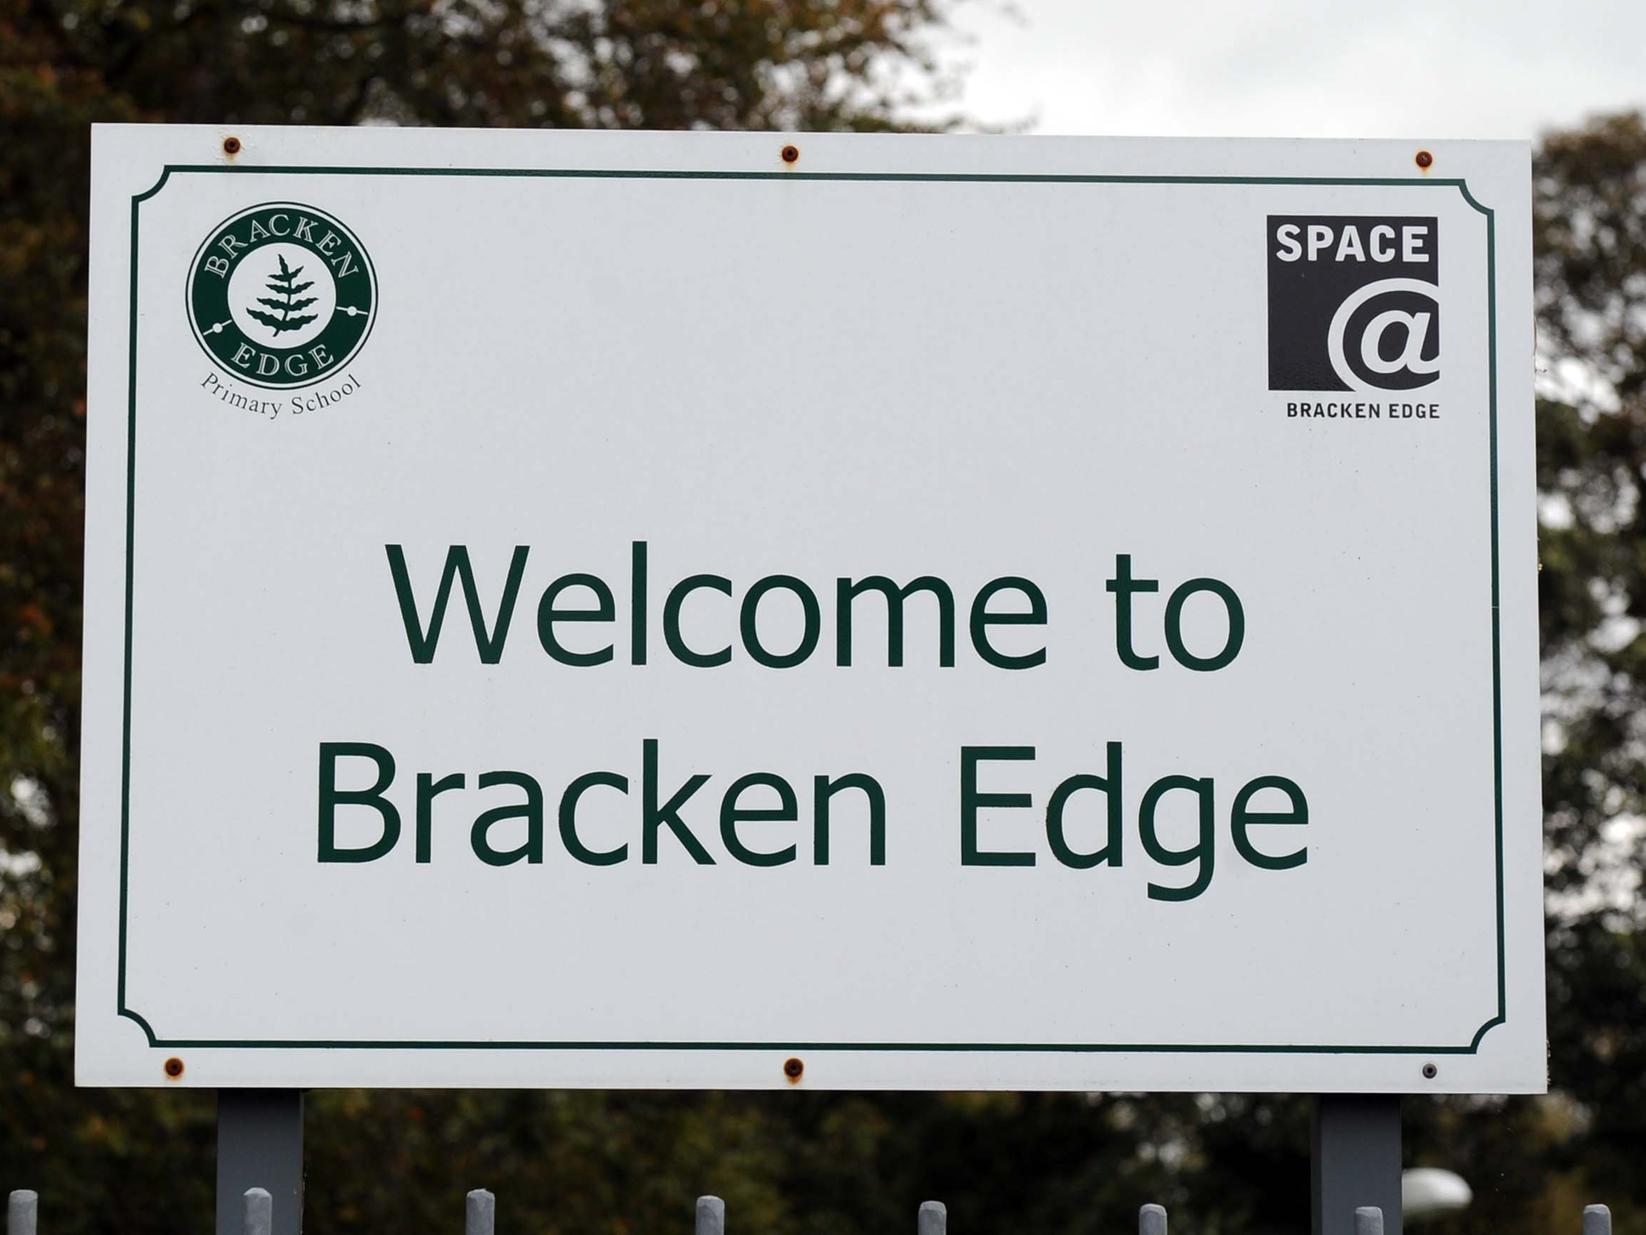 33 per cent of students at Bracken Edge Primary School met their expected standard